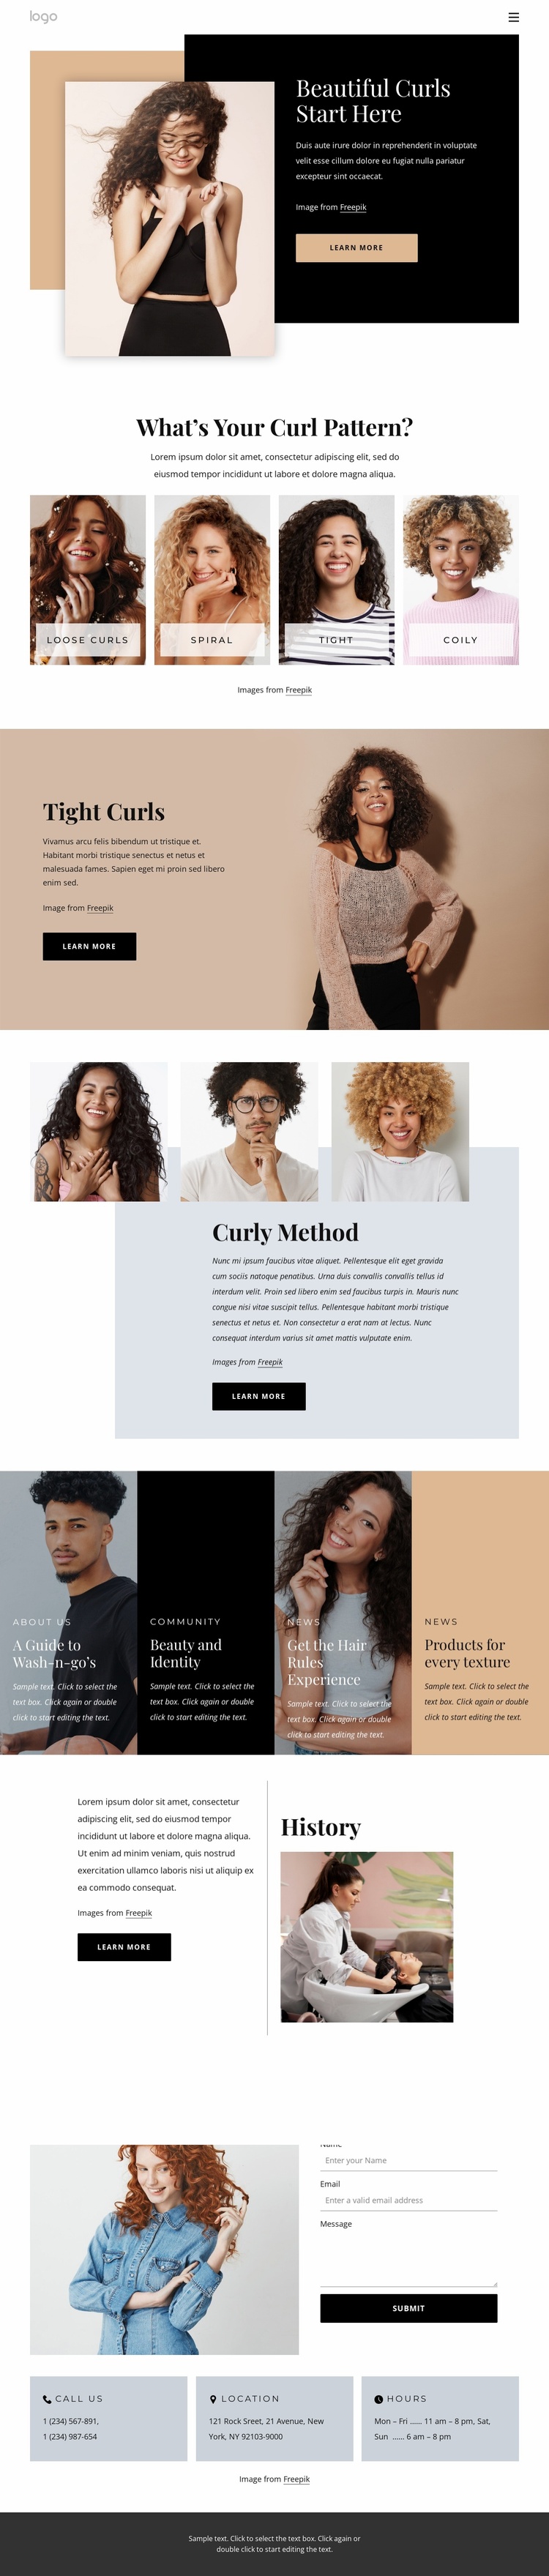 Bring out the best in your curls eCommerce Template